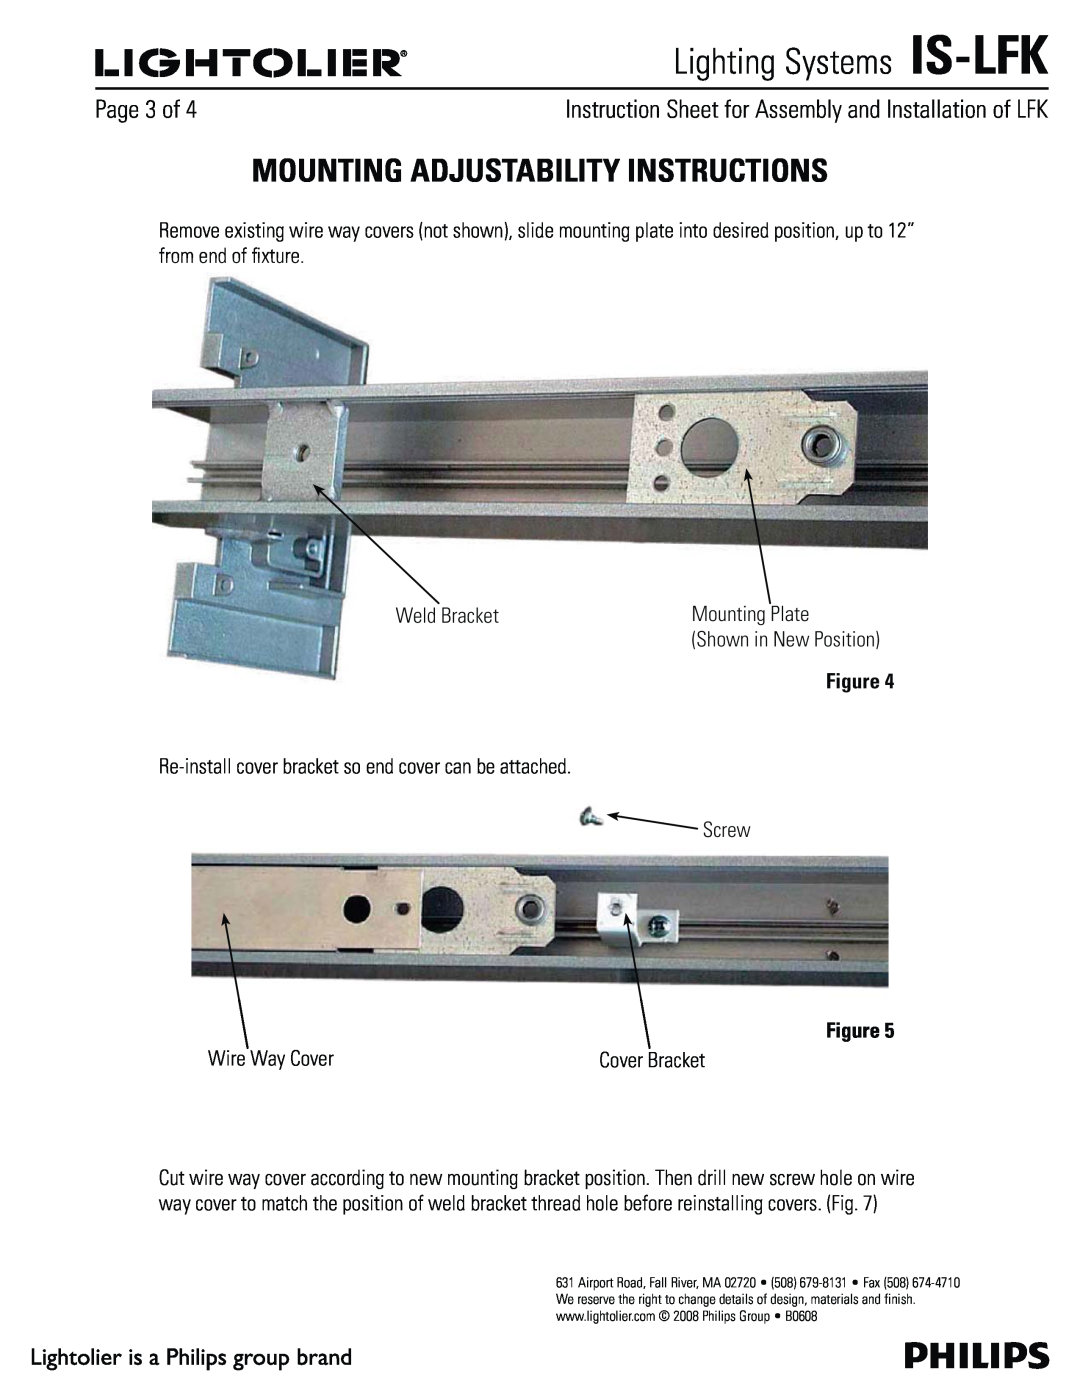 Lightolier manual Lighting Systems IS-LFK, Mounting Adjustability Instructions, 1BHFPG, Screw, 8JSF8BZ$PWFS 